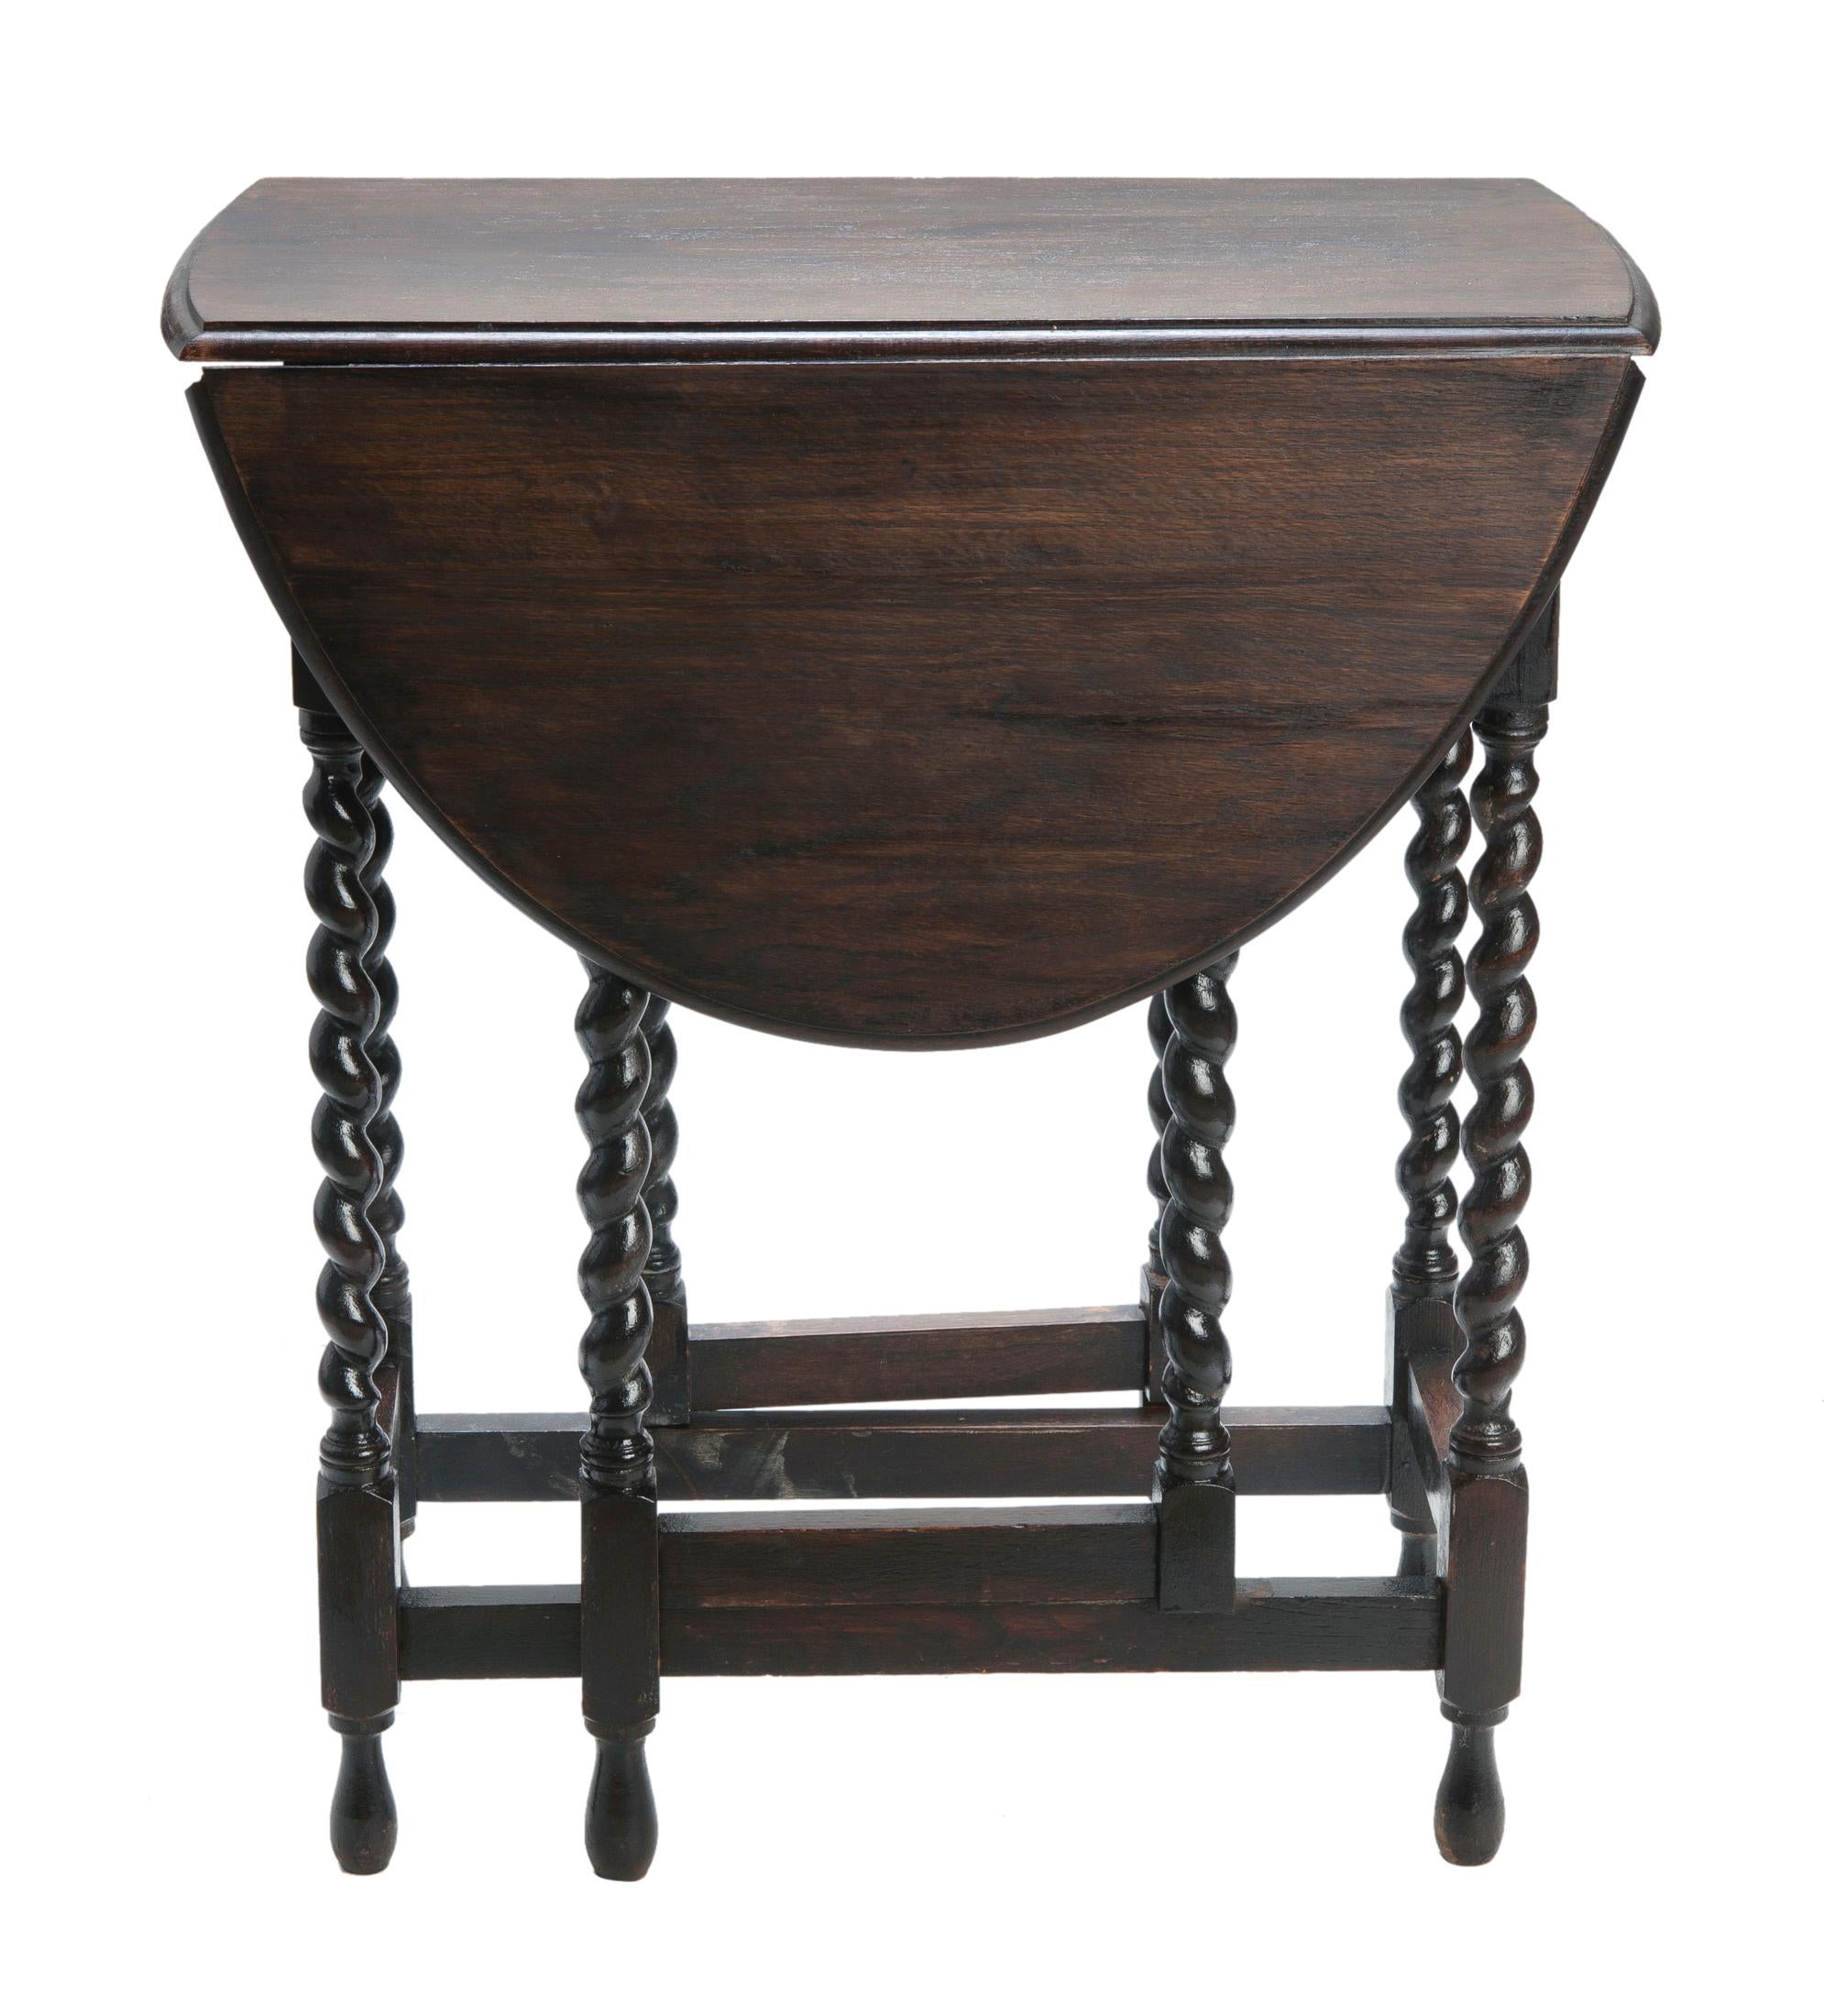 19th Century Antique English Oak Oval Drop Leaf Table For Sale